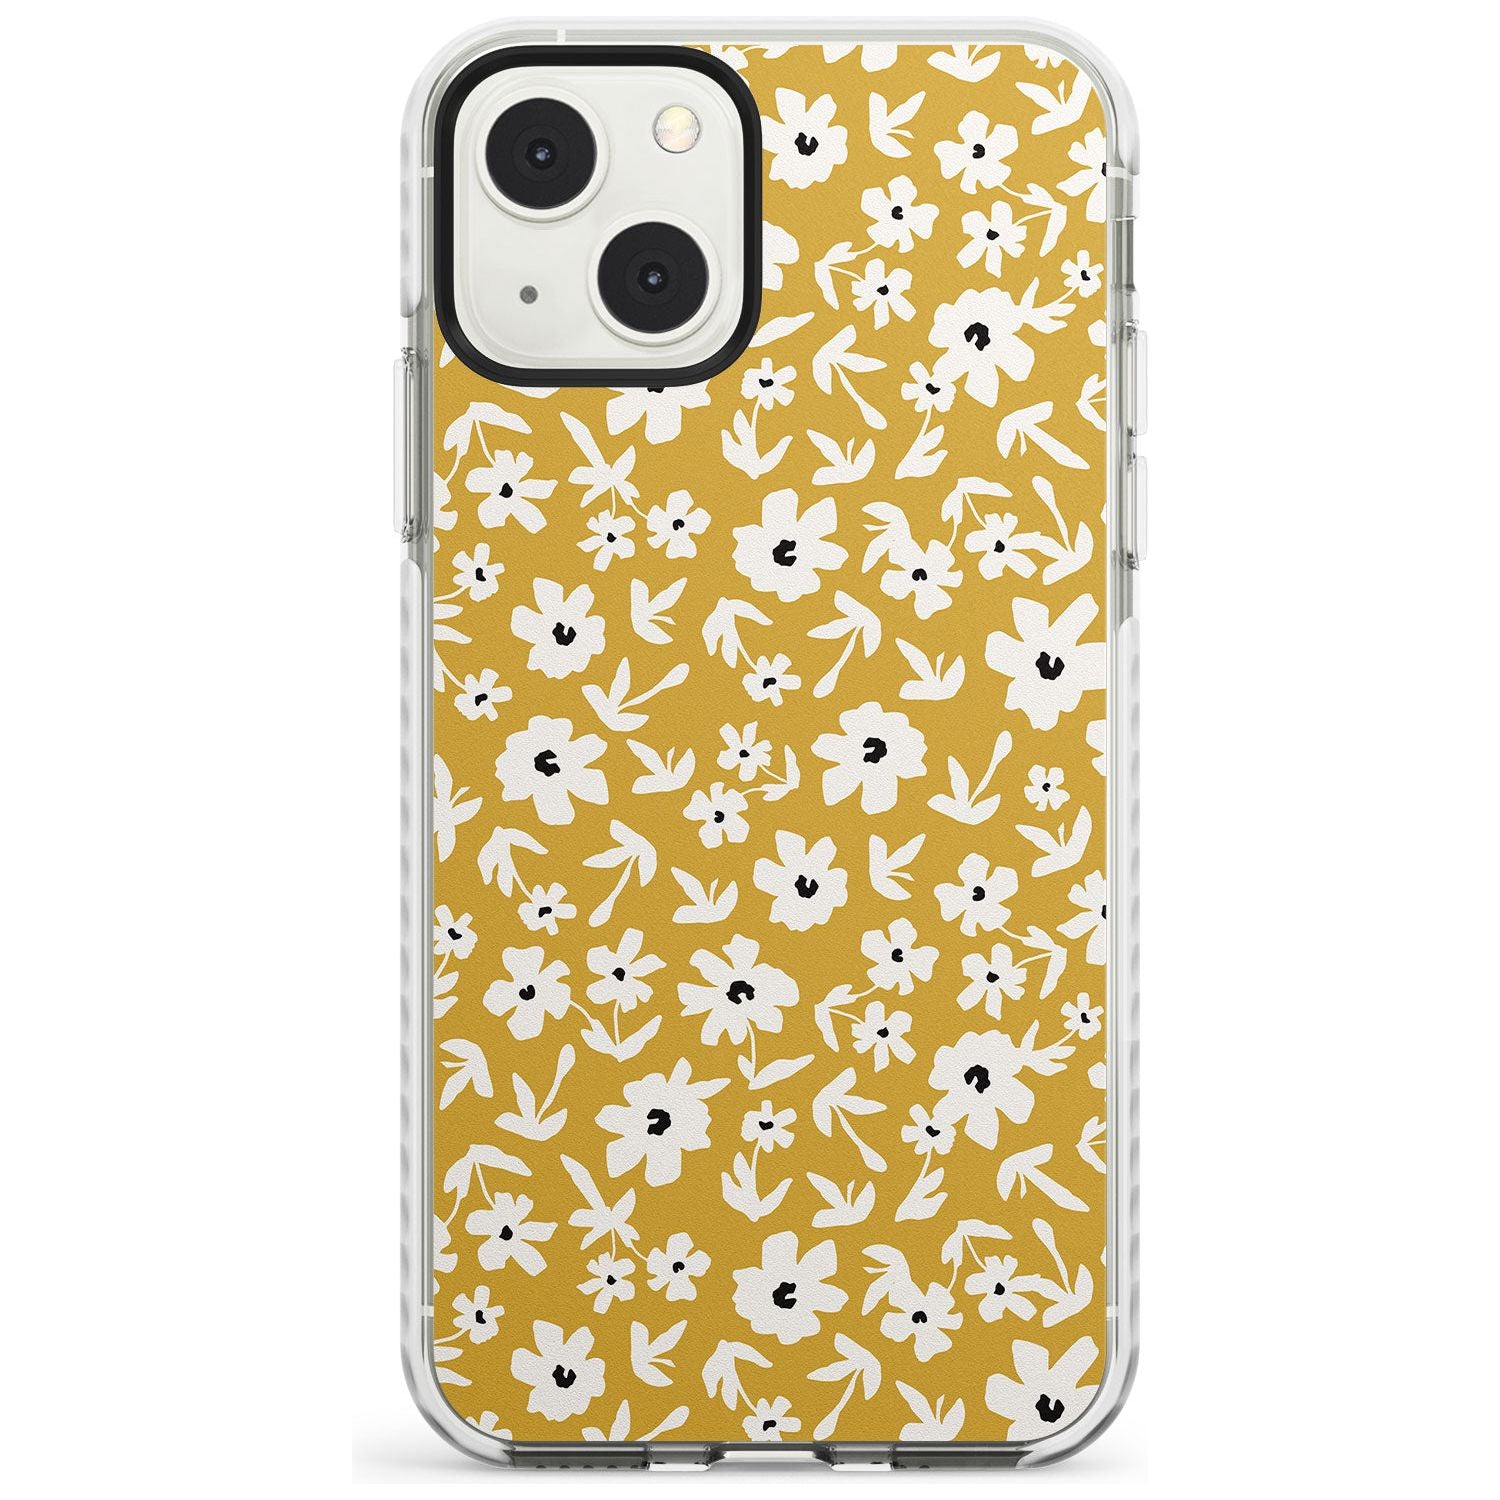 Floral Print on Mustard Cute Floral